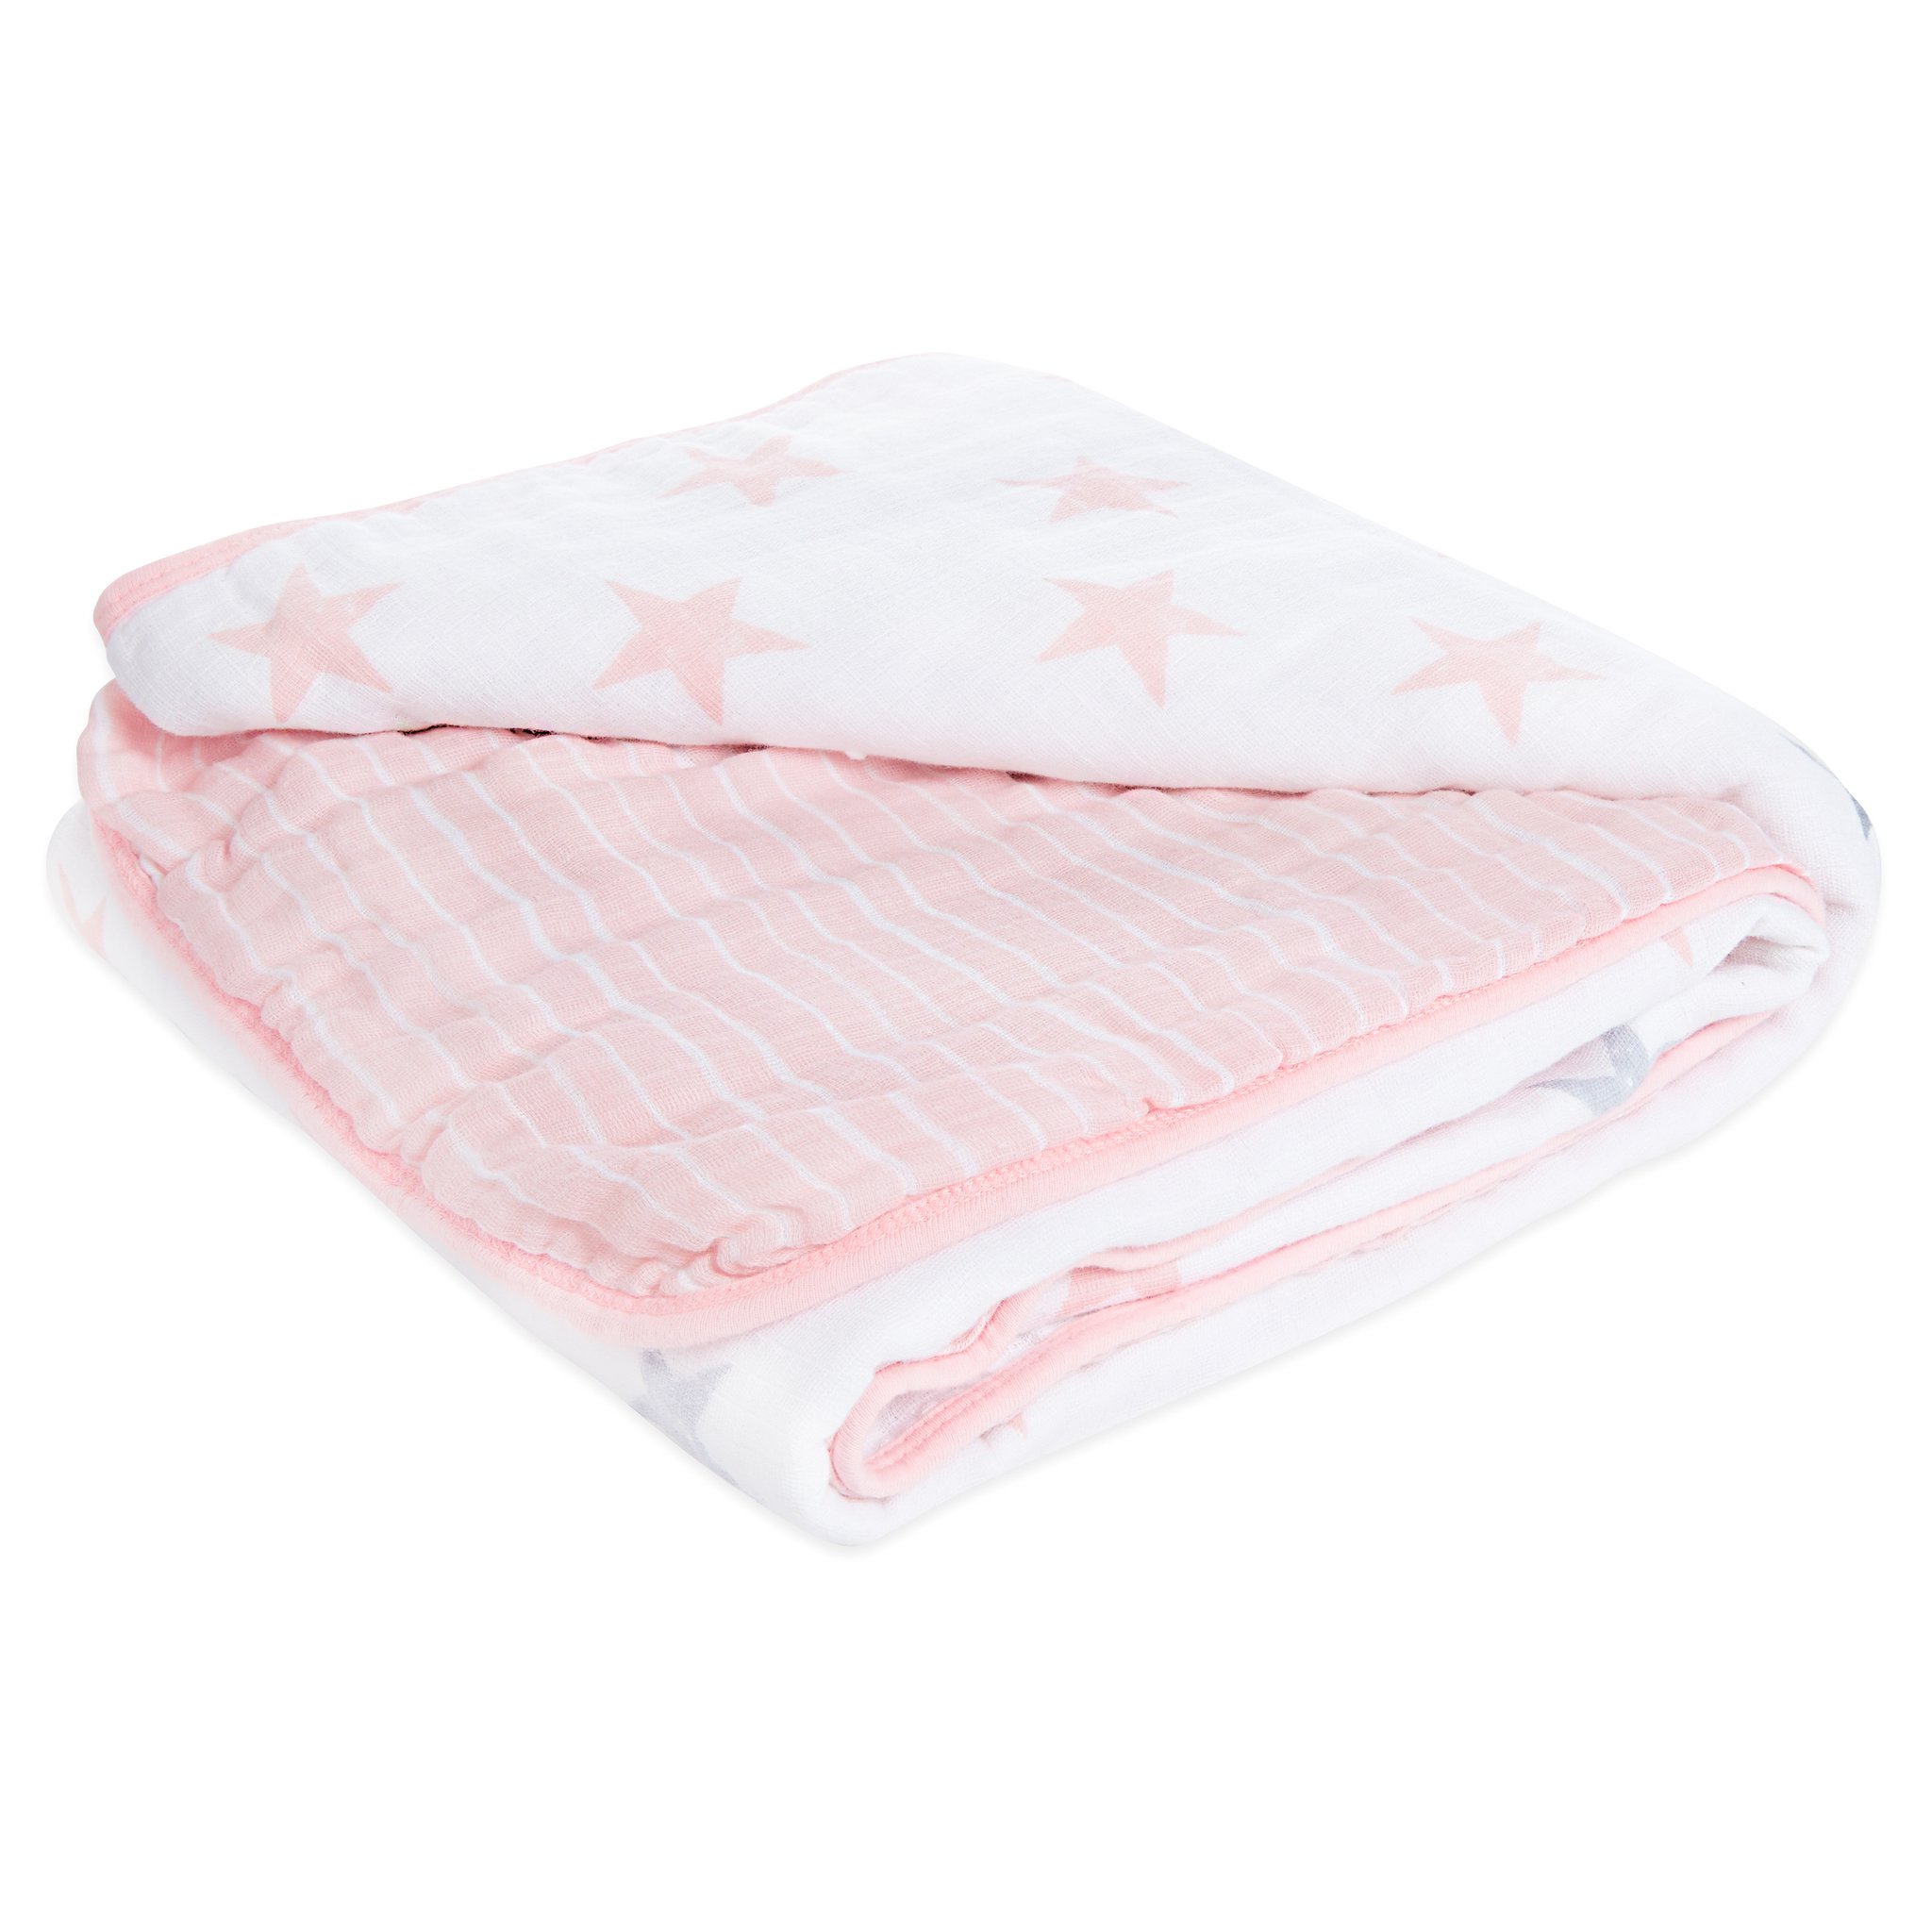 aden by aden + anais: doll stars: large classic muslin dream blanket